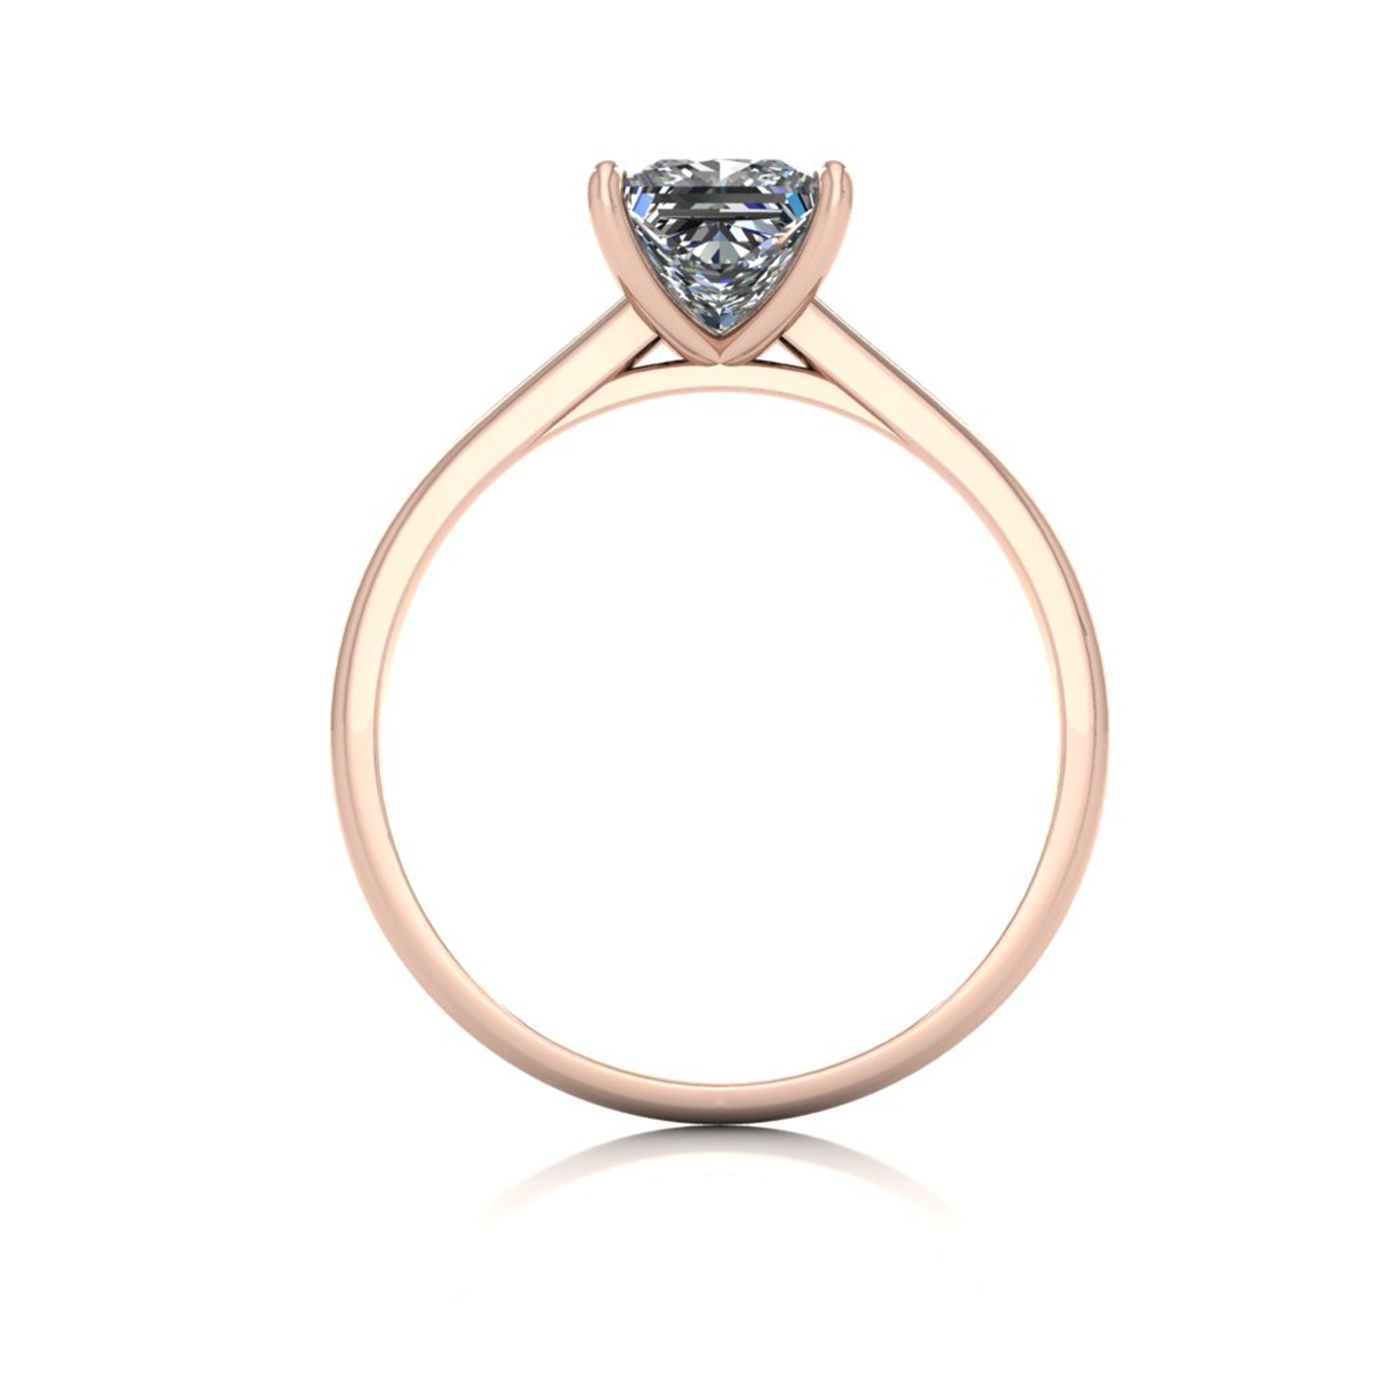 18K ROSE GOLD 4 PRONGS SOLITAIRE PRINCESS CUT DIAMOND ENGAGEMENT RING WITH WHISPER THIN BAND